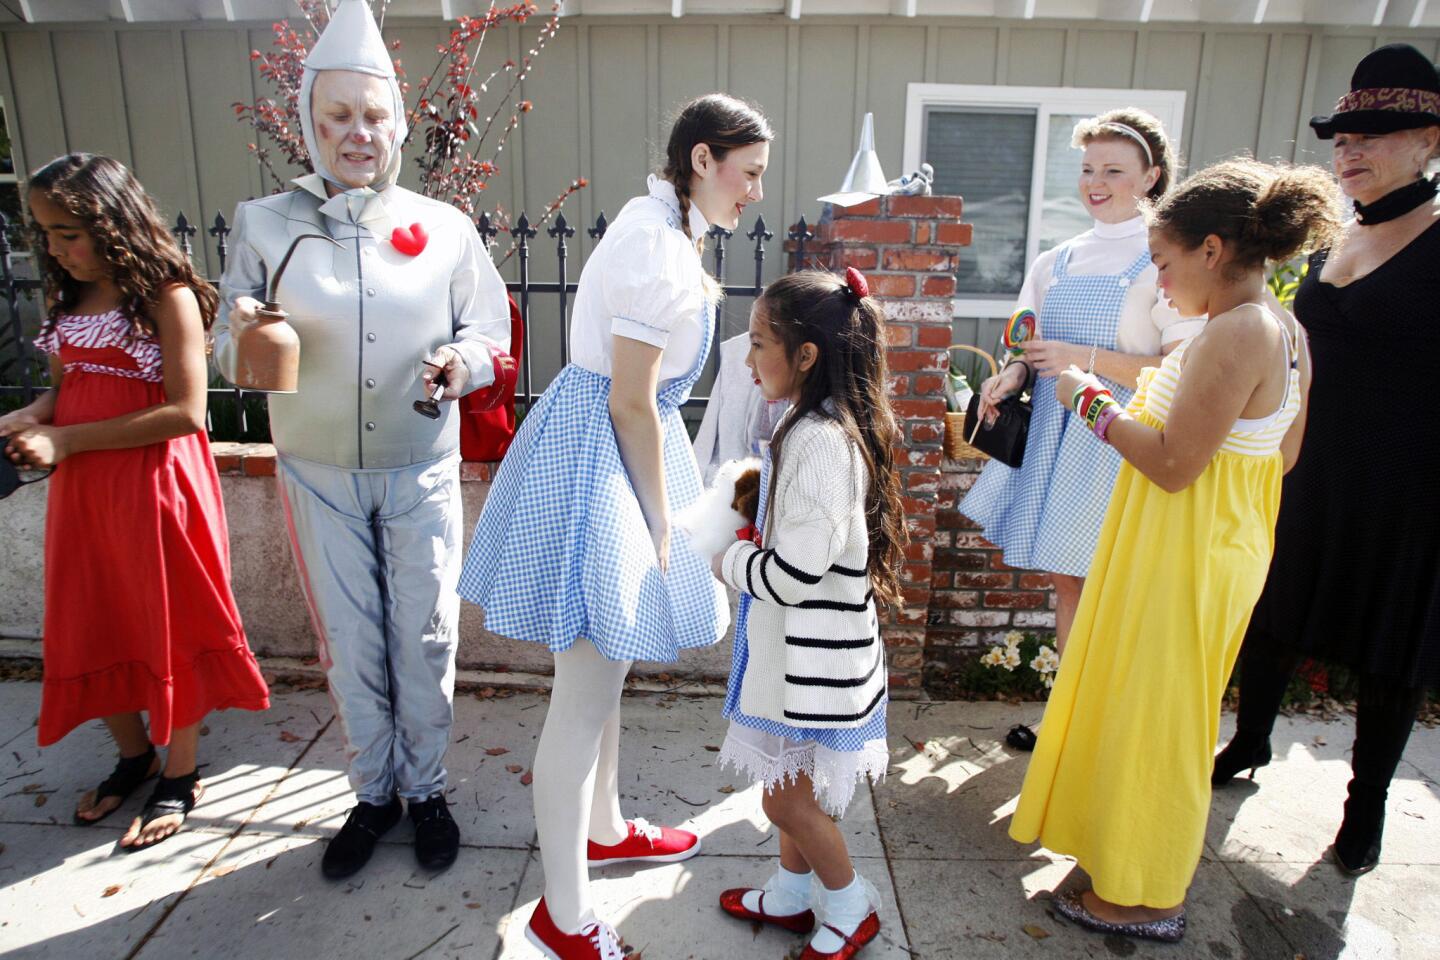 Brenda Lara, 10, from left, Sharon Fane, Montana McCarter, Megan Jimenez, 8, MJ Barnett, Gaby Barnett, 11, and Dorothy Lagrue dress up as characters from the Wizard of Oz during Burbank on Parade, which took place on Olive Ave. between Keystone and Lomita streets in Burbank on Saturday, April 6, 2013.